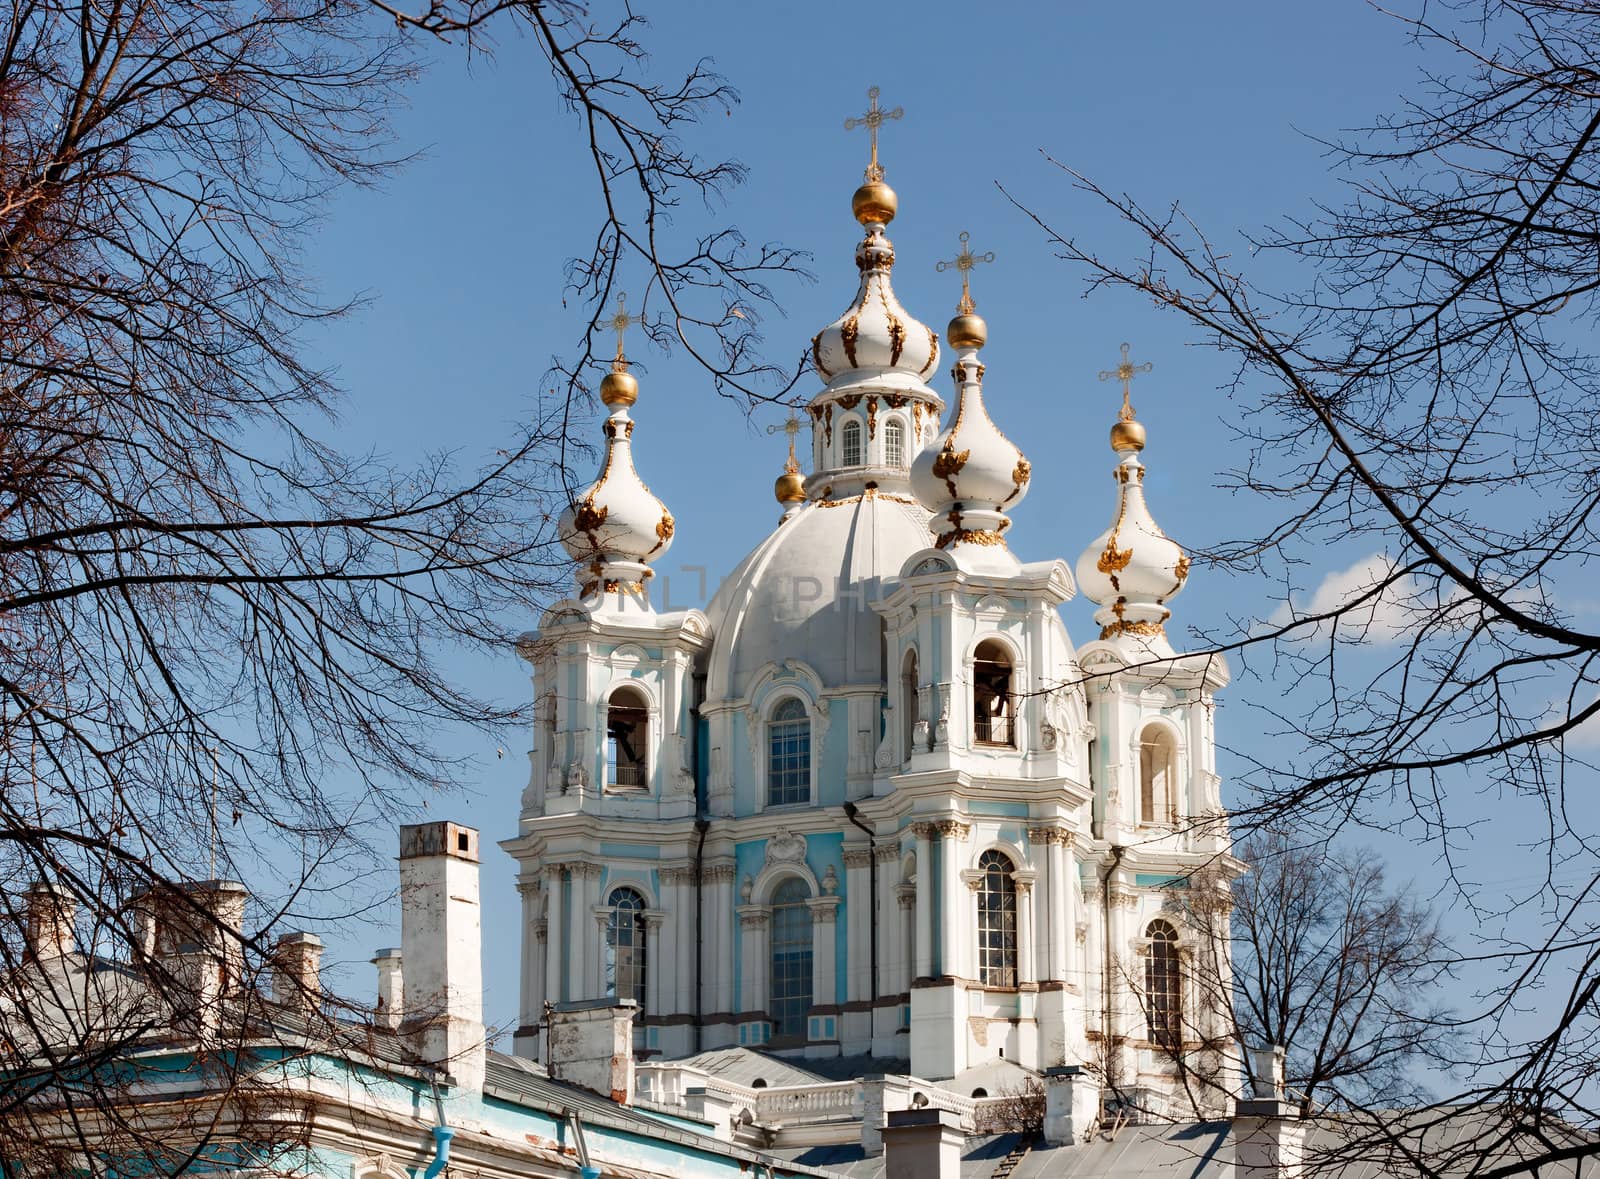 View on Smolny cathedral in st Petersburg, Russia